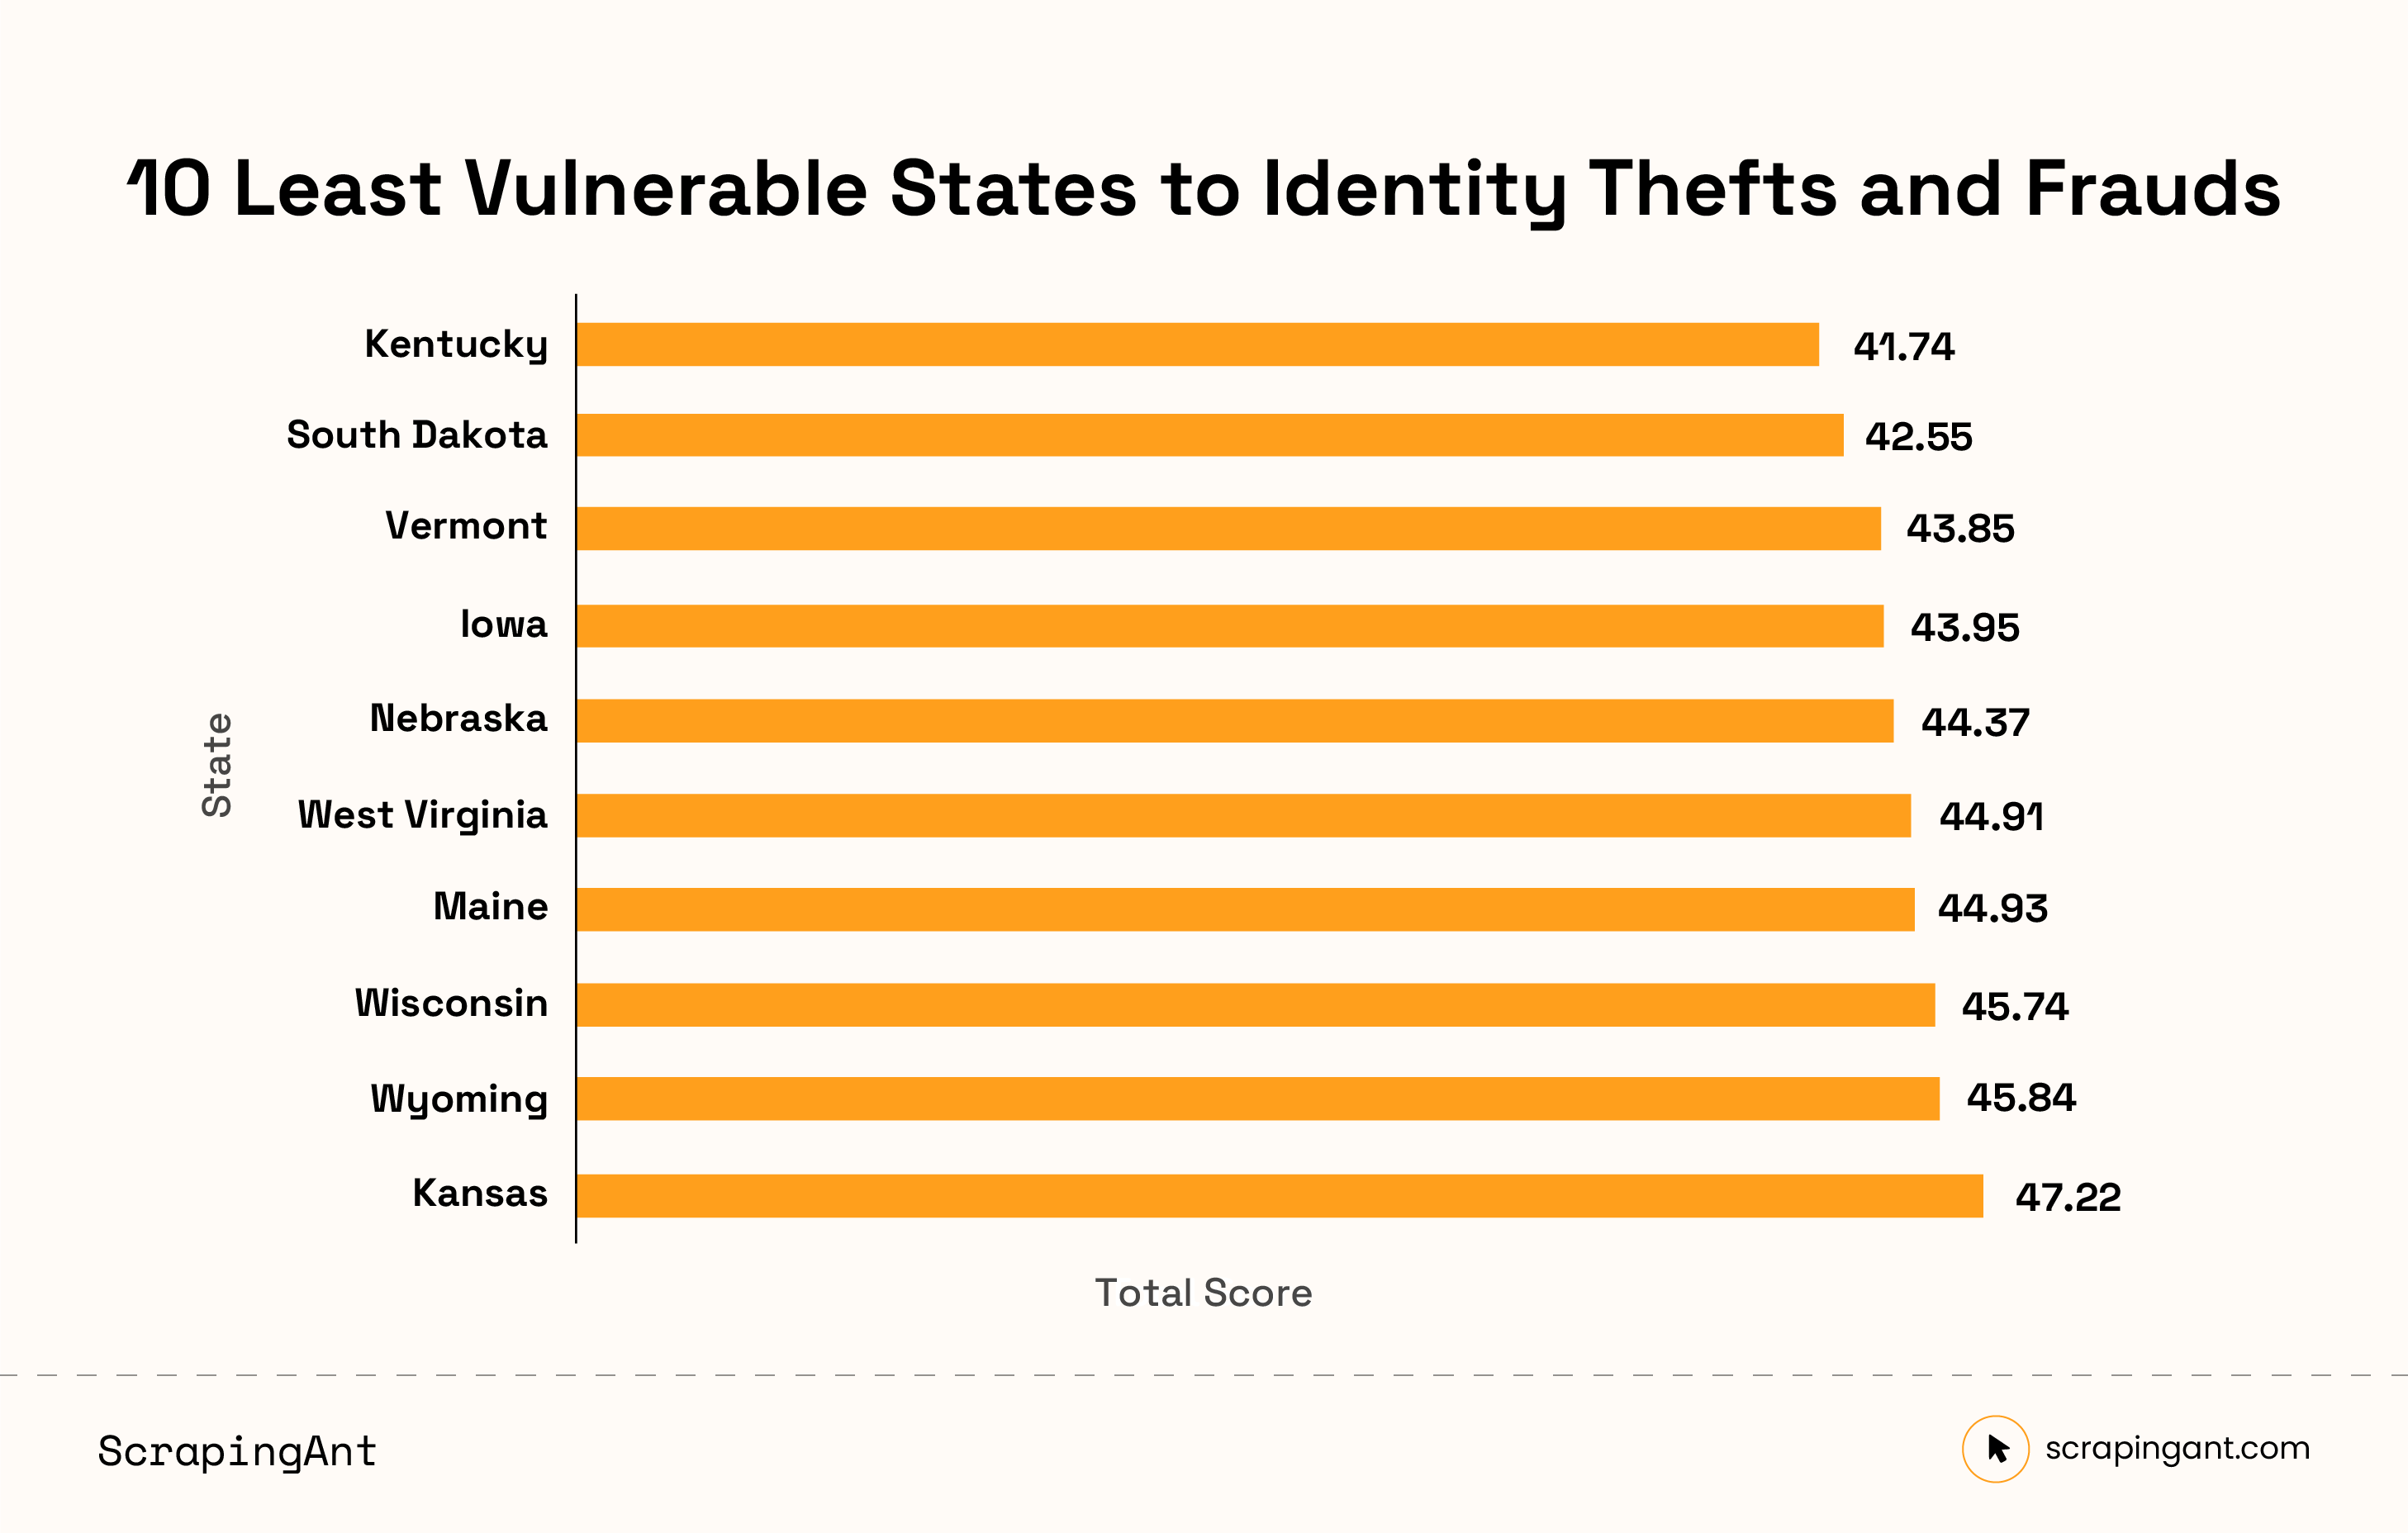 10 Least Vulnerable States to Identity Thefts and Frauds